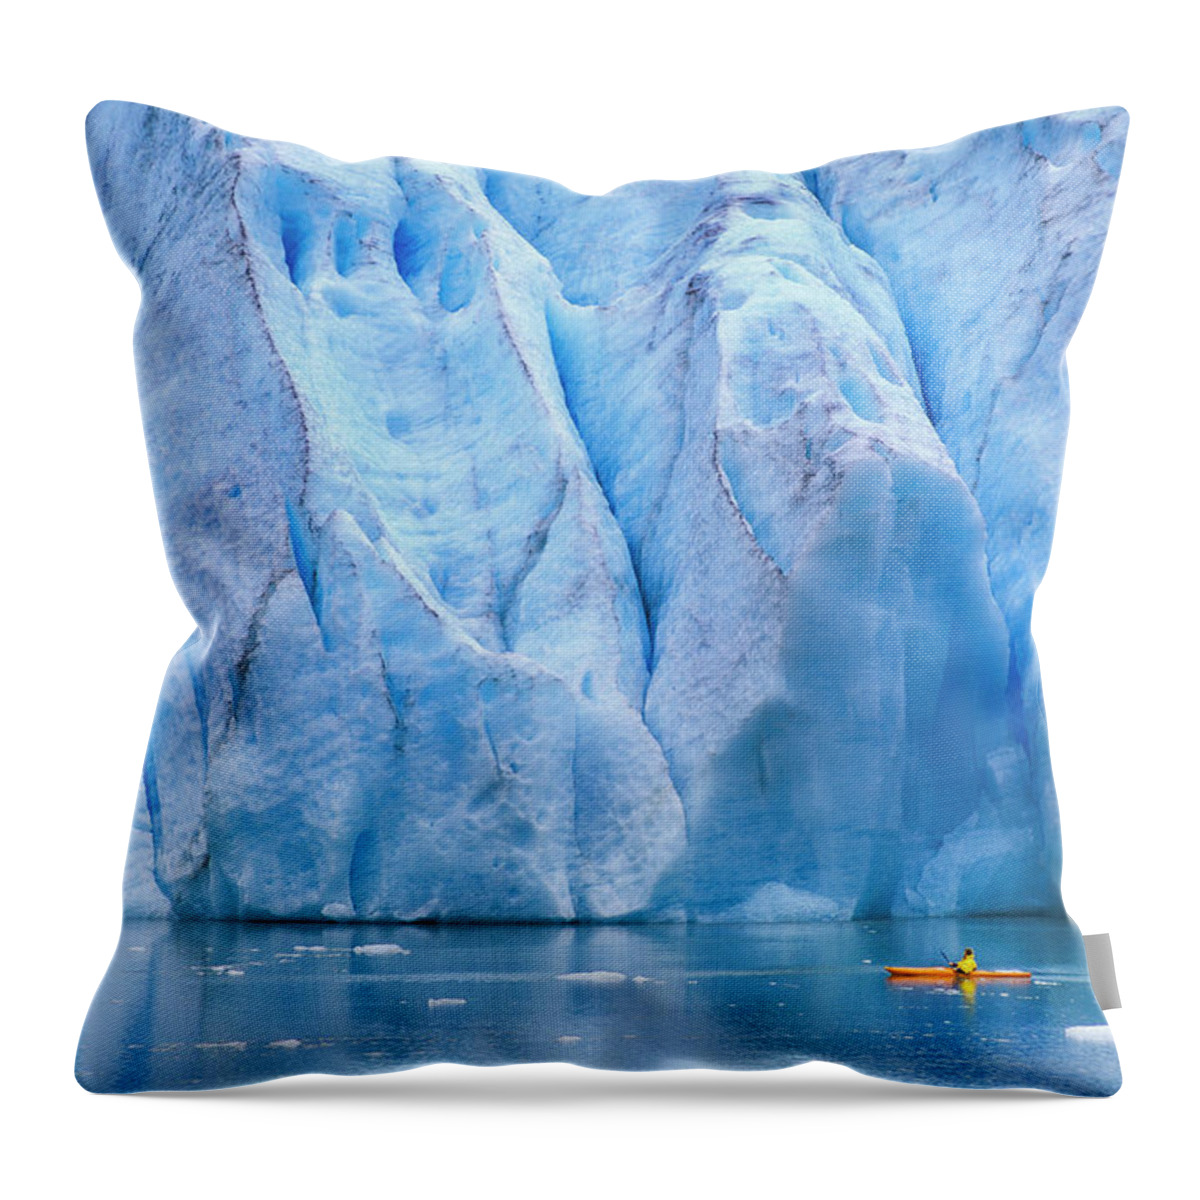 Estock Throw Pillow featuring the digital art Canada, Kayaking In Front Of Glacier by Heeb Photos